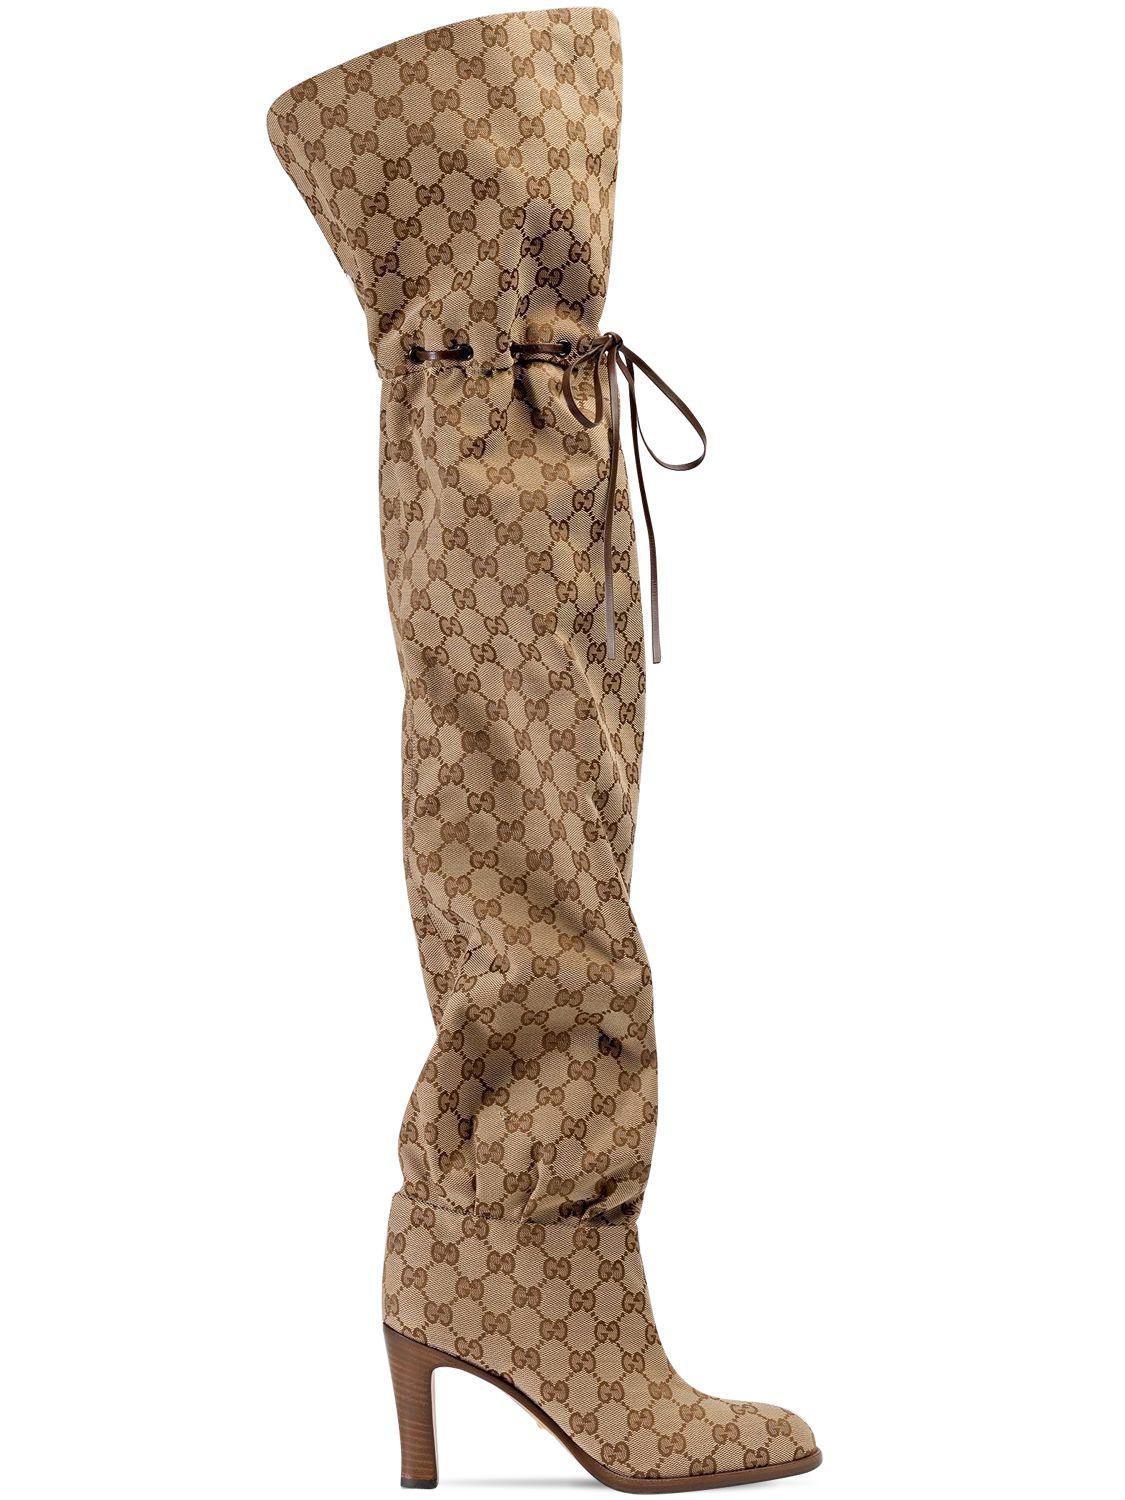 afslappet rysten reservedele Gucci 85mm Lisa Gg Canvas Over-the-knee Boots in Natural | Lyst